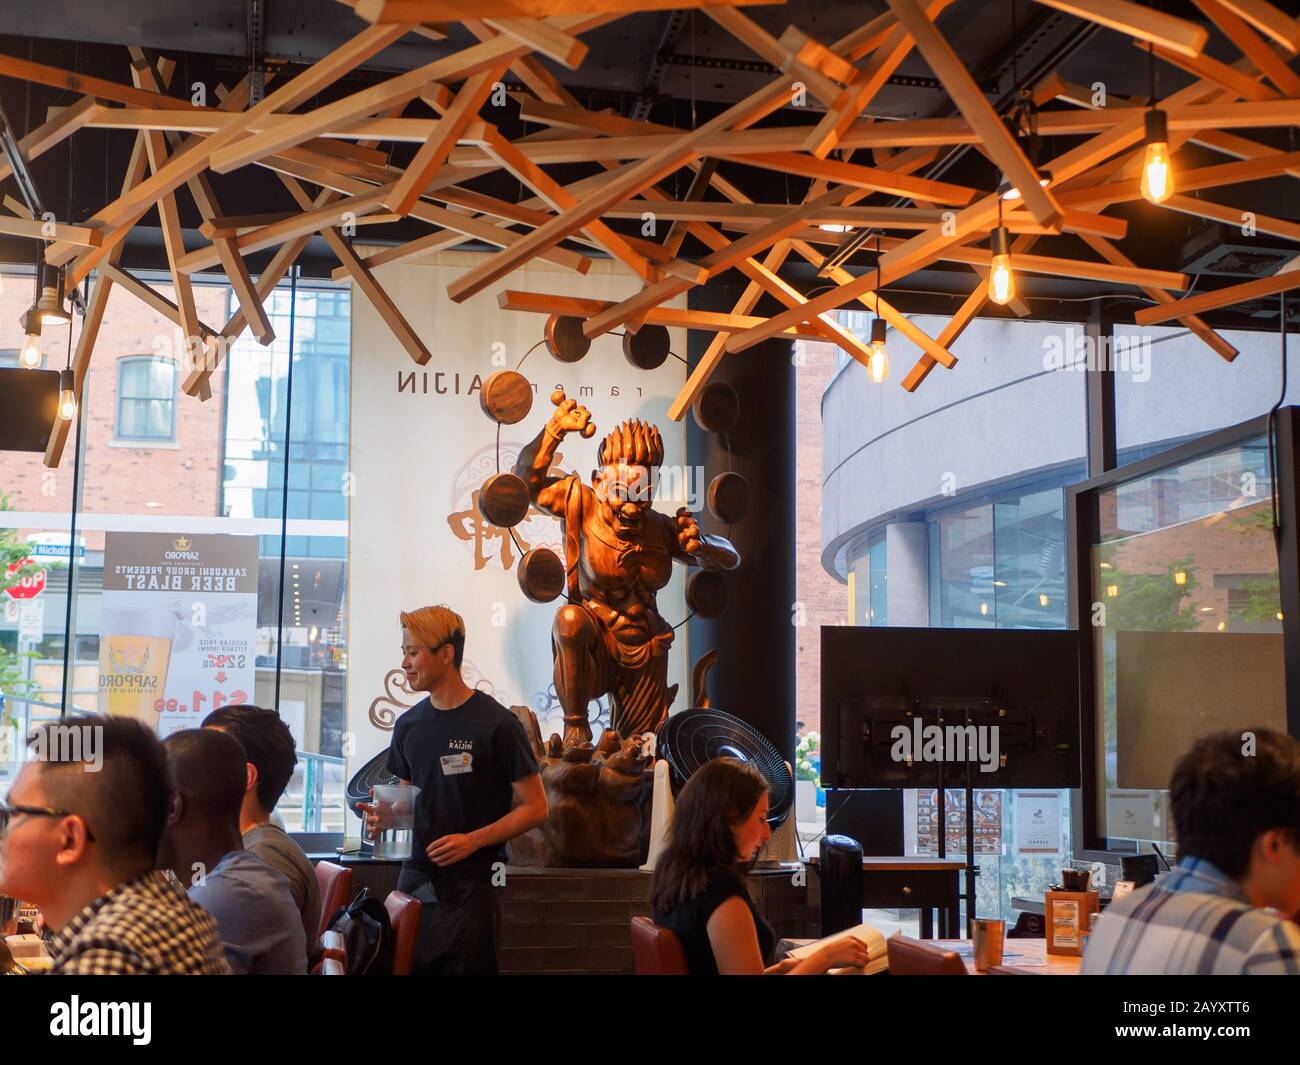 Statue of god Raijin looking down on people eating Japanese food in a restaurant. Stock Photo